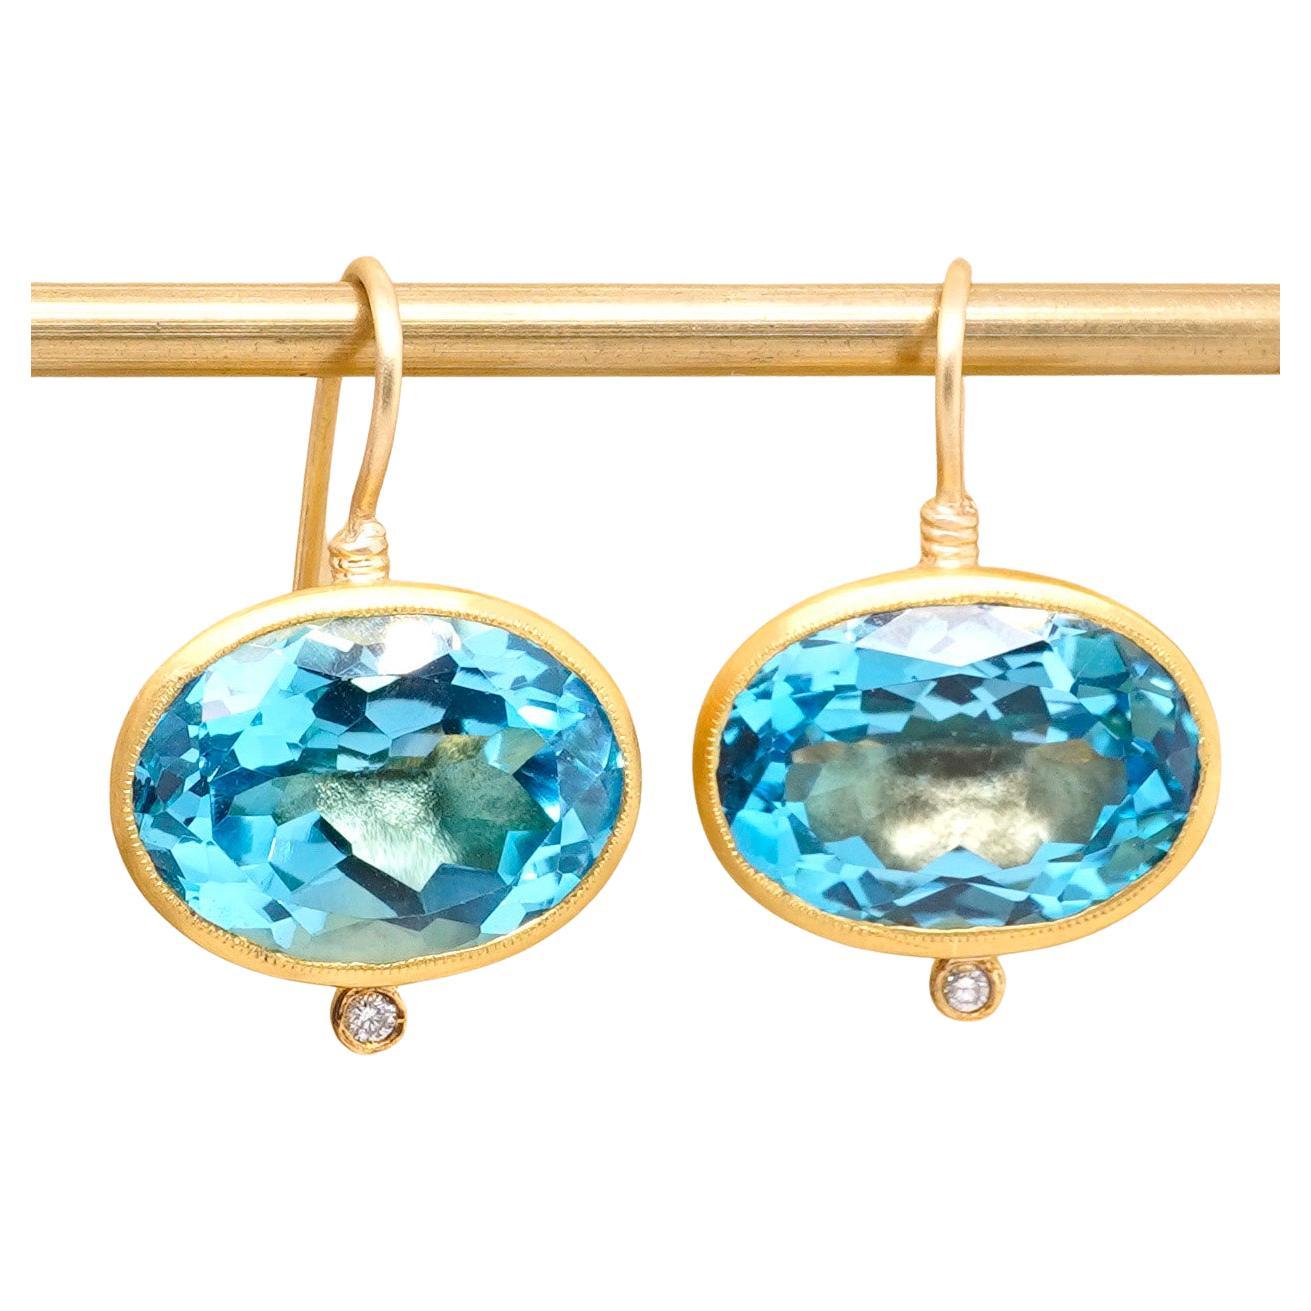 Large, 22.15 ct Bright, Oval, Blue Topaz, Earrings with Diamond Detail, in 24kt Gold by Prehistoric Works of Istanbul, Turkey. Measurements: Total Length, 24mm (.9